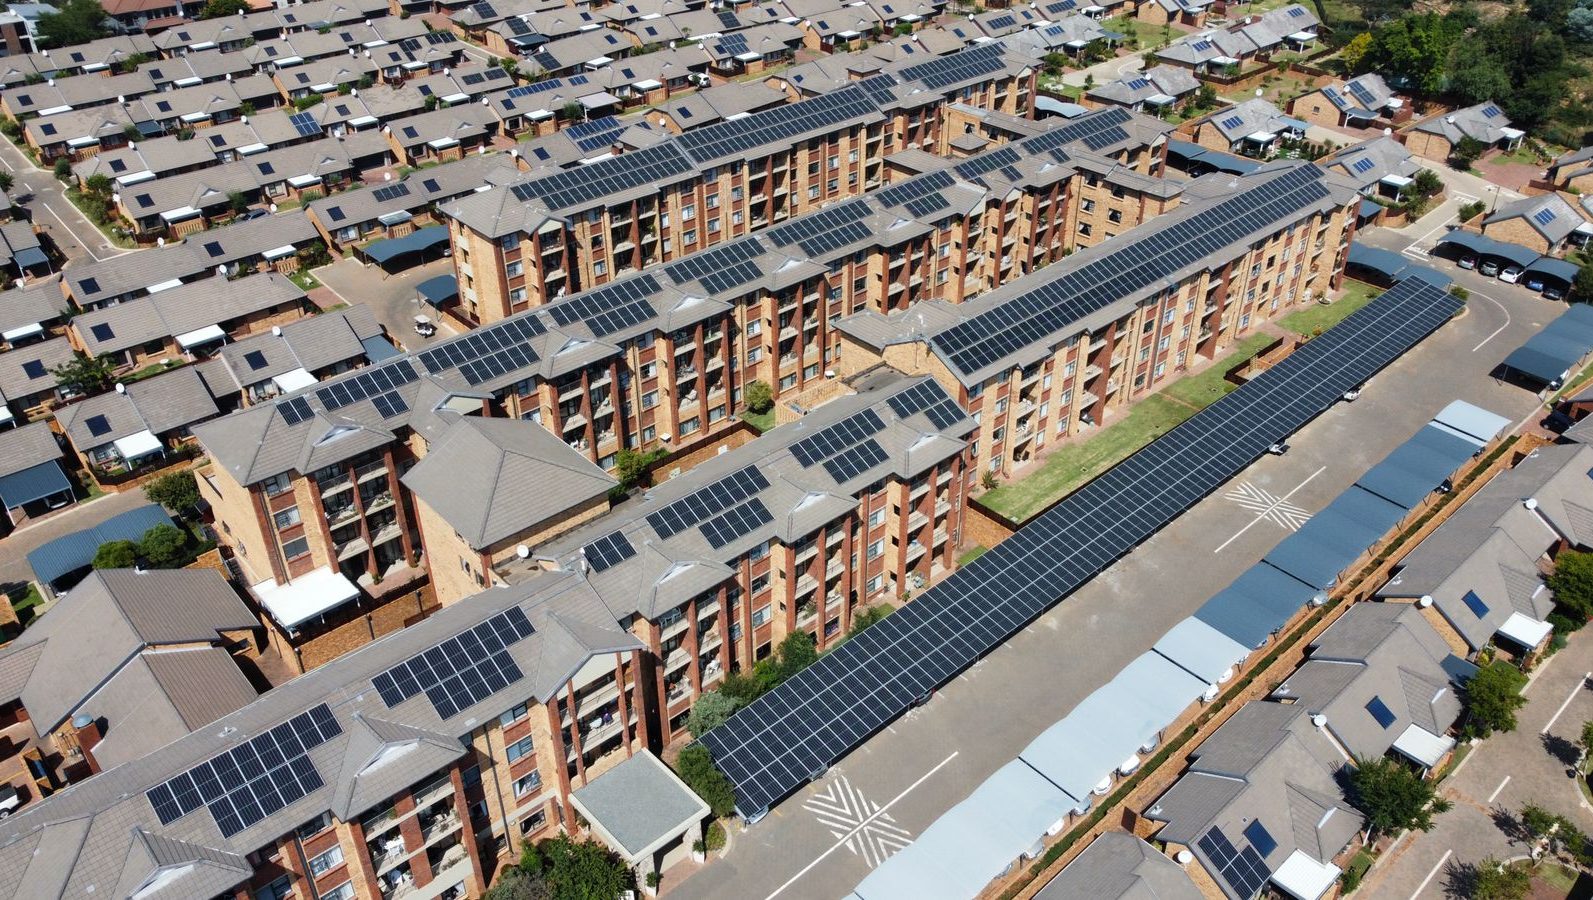 Bronberg Retirement Village, Tshwane - a Decentral Energy solar PV system benefitting from lower electricity costs